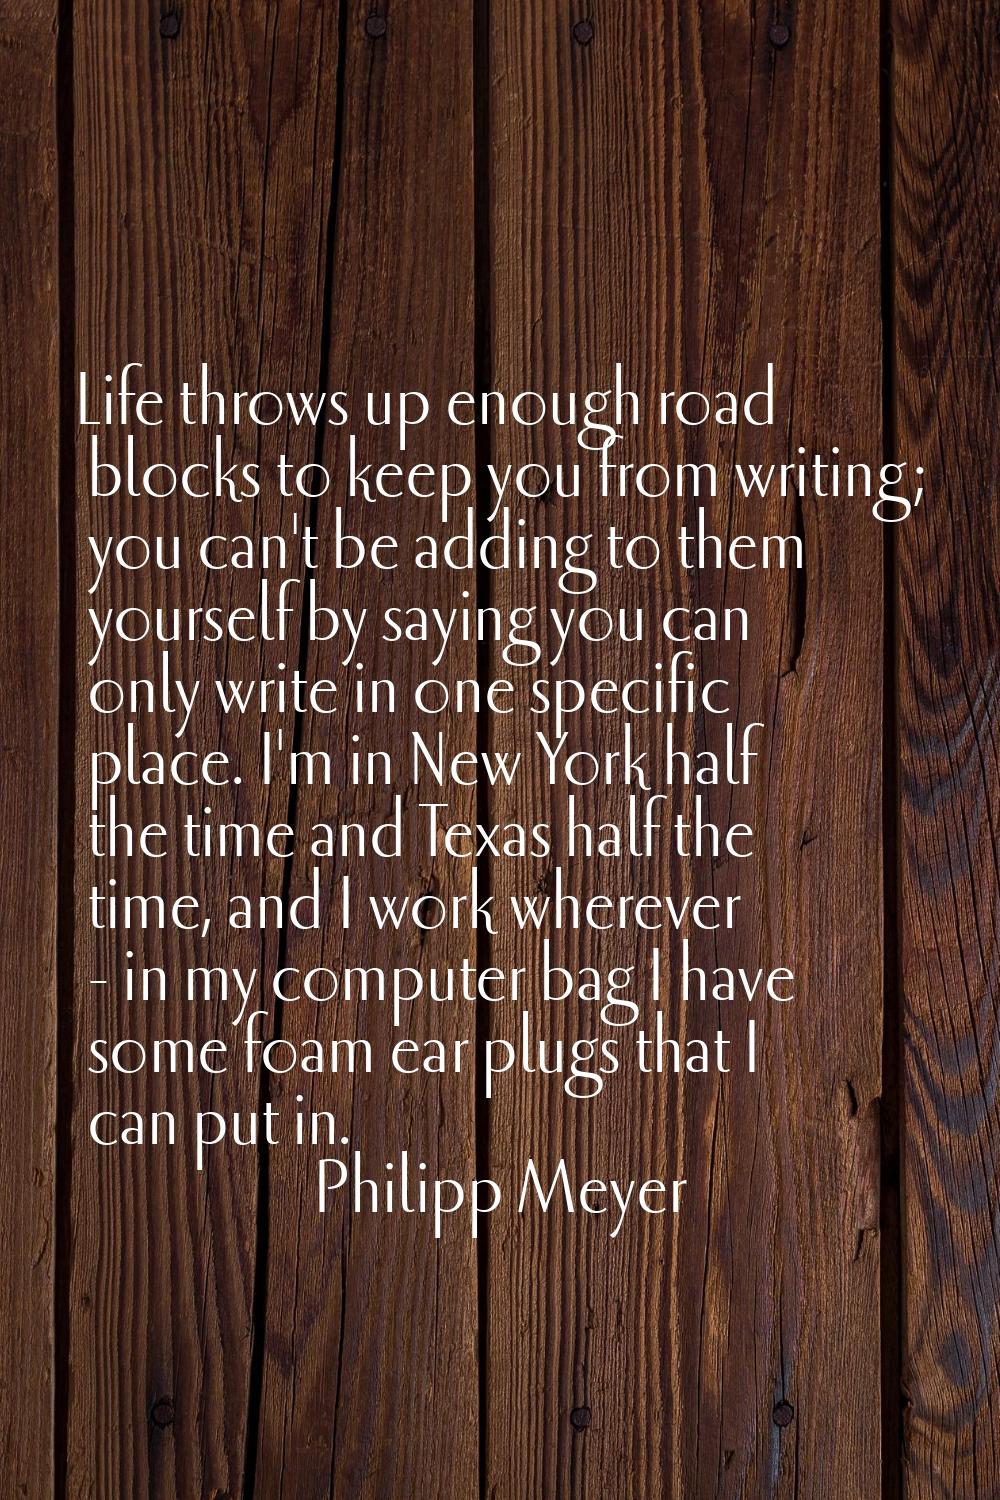 Life throws up enough road blocks to keep you from writing; you can't be adding to them yourself by